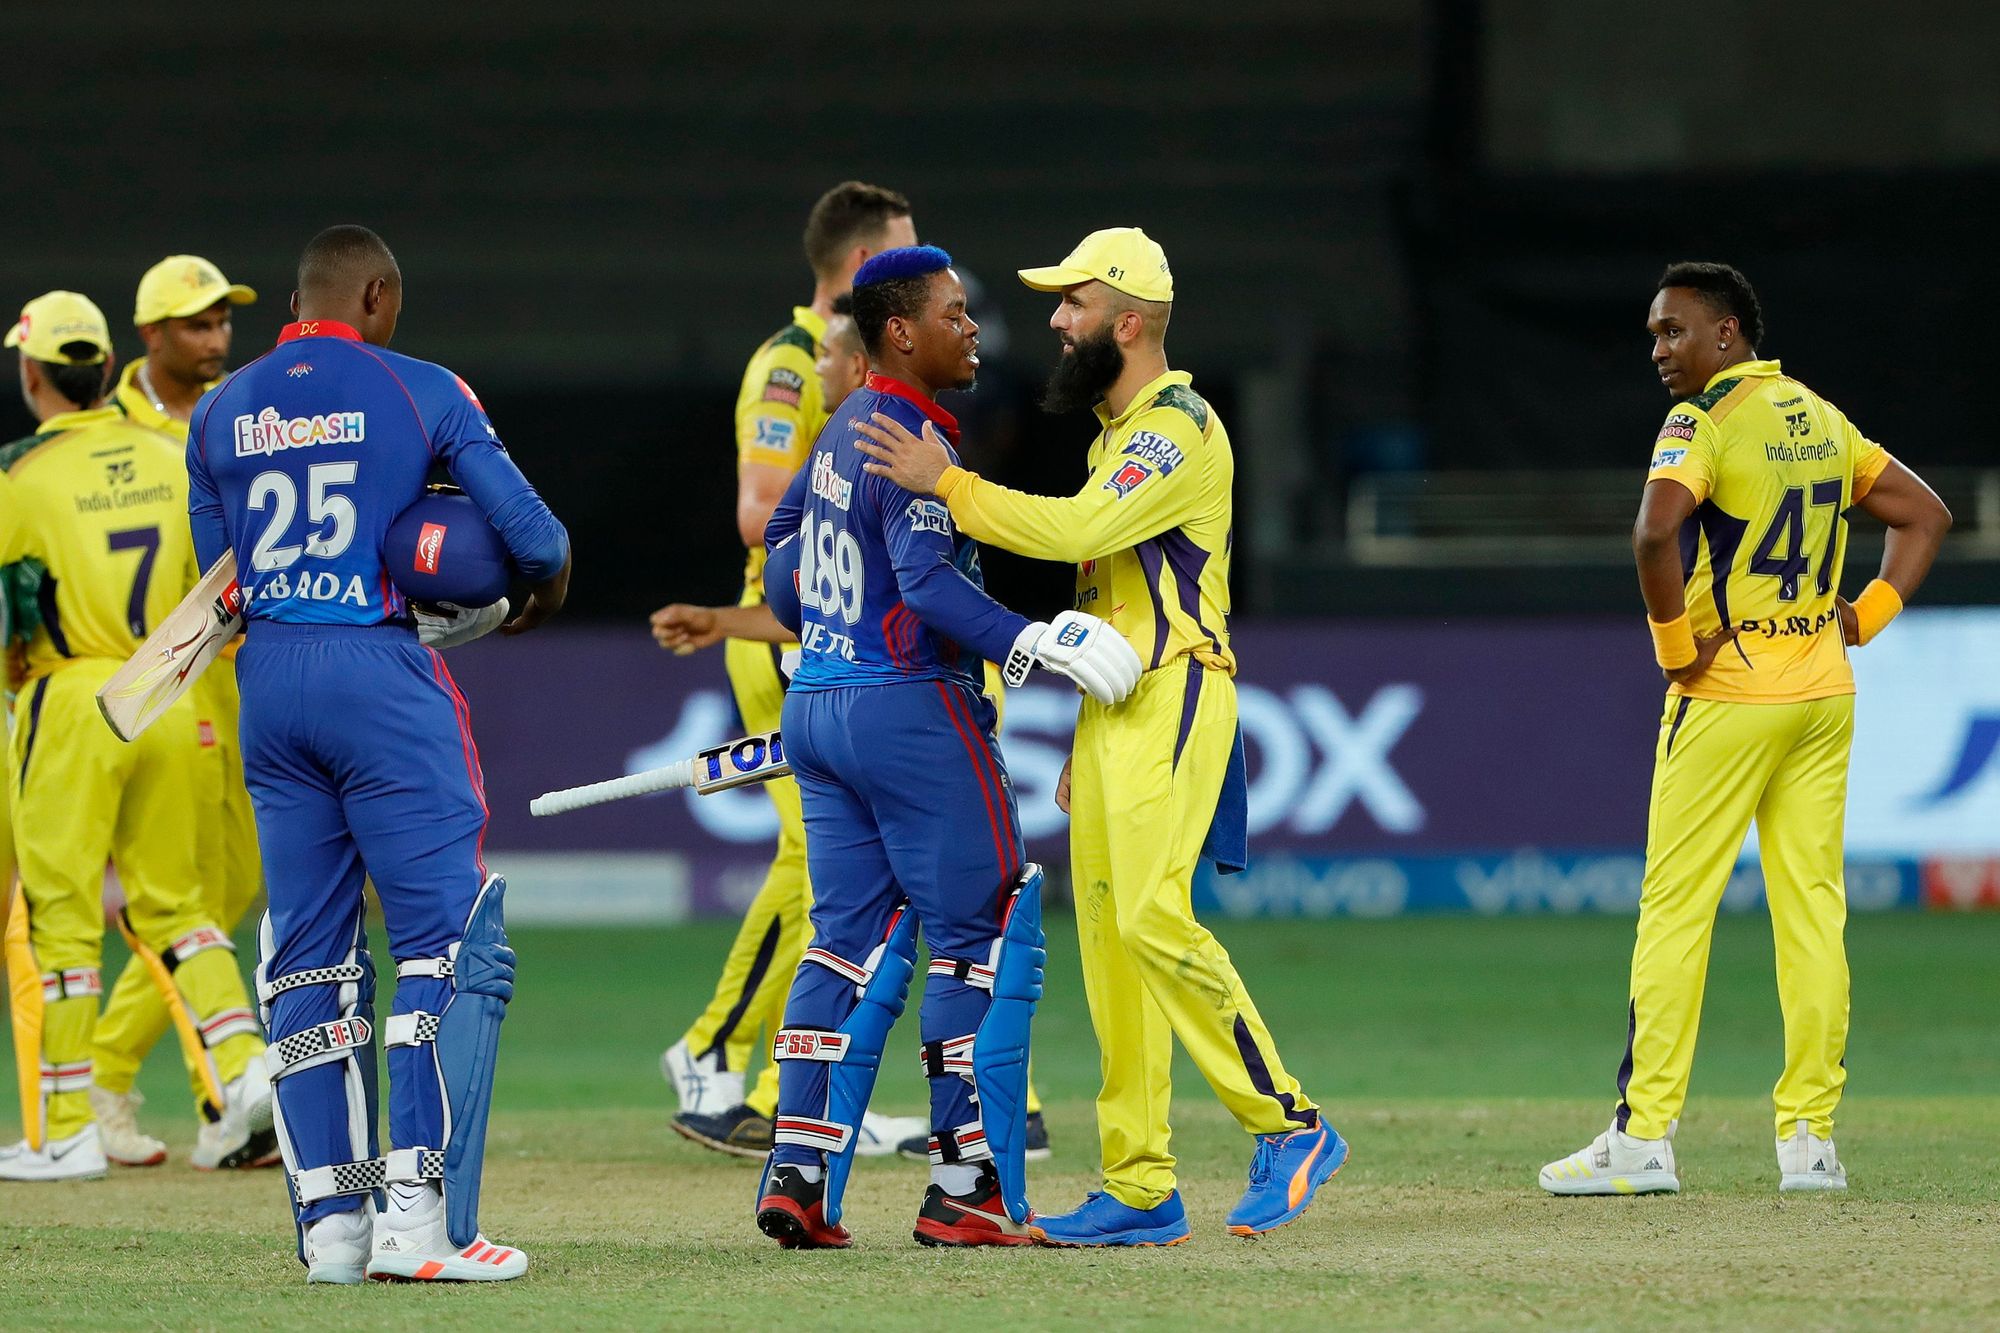 DC registered a 3-wicket win over CSK at Dubai | BCCI/IPL